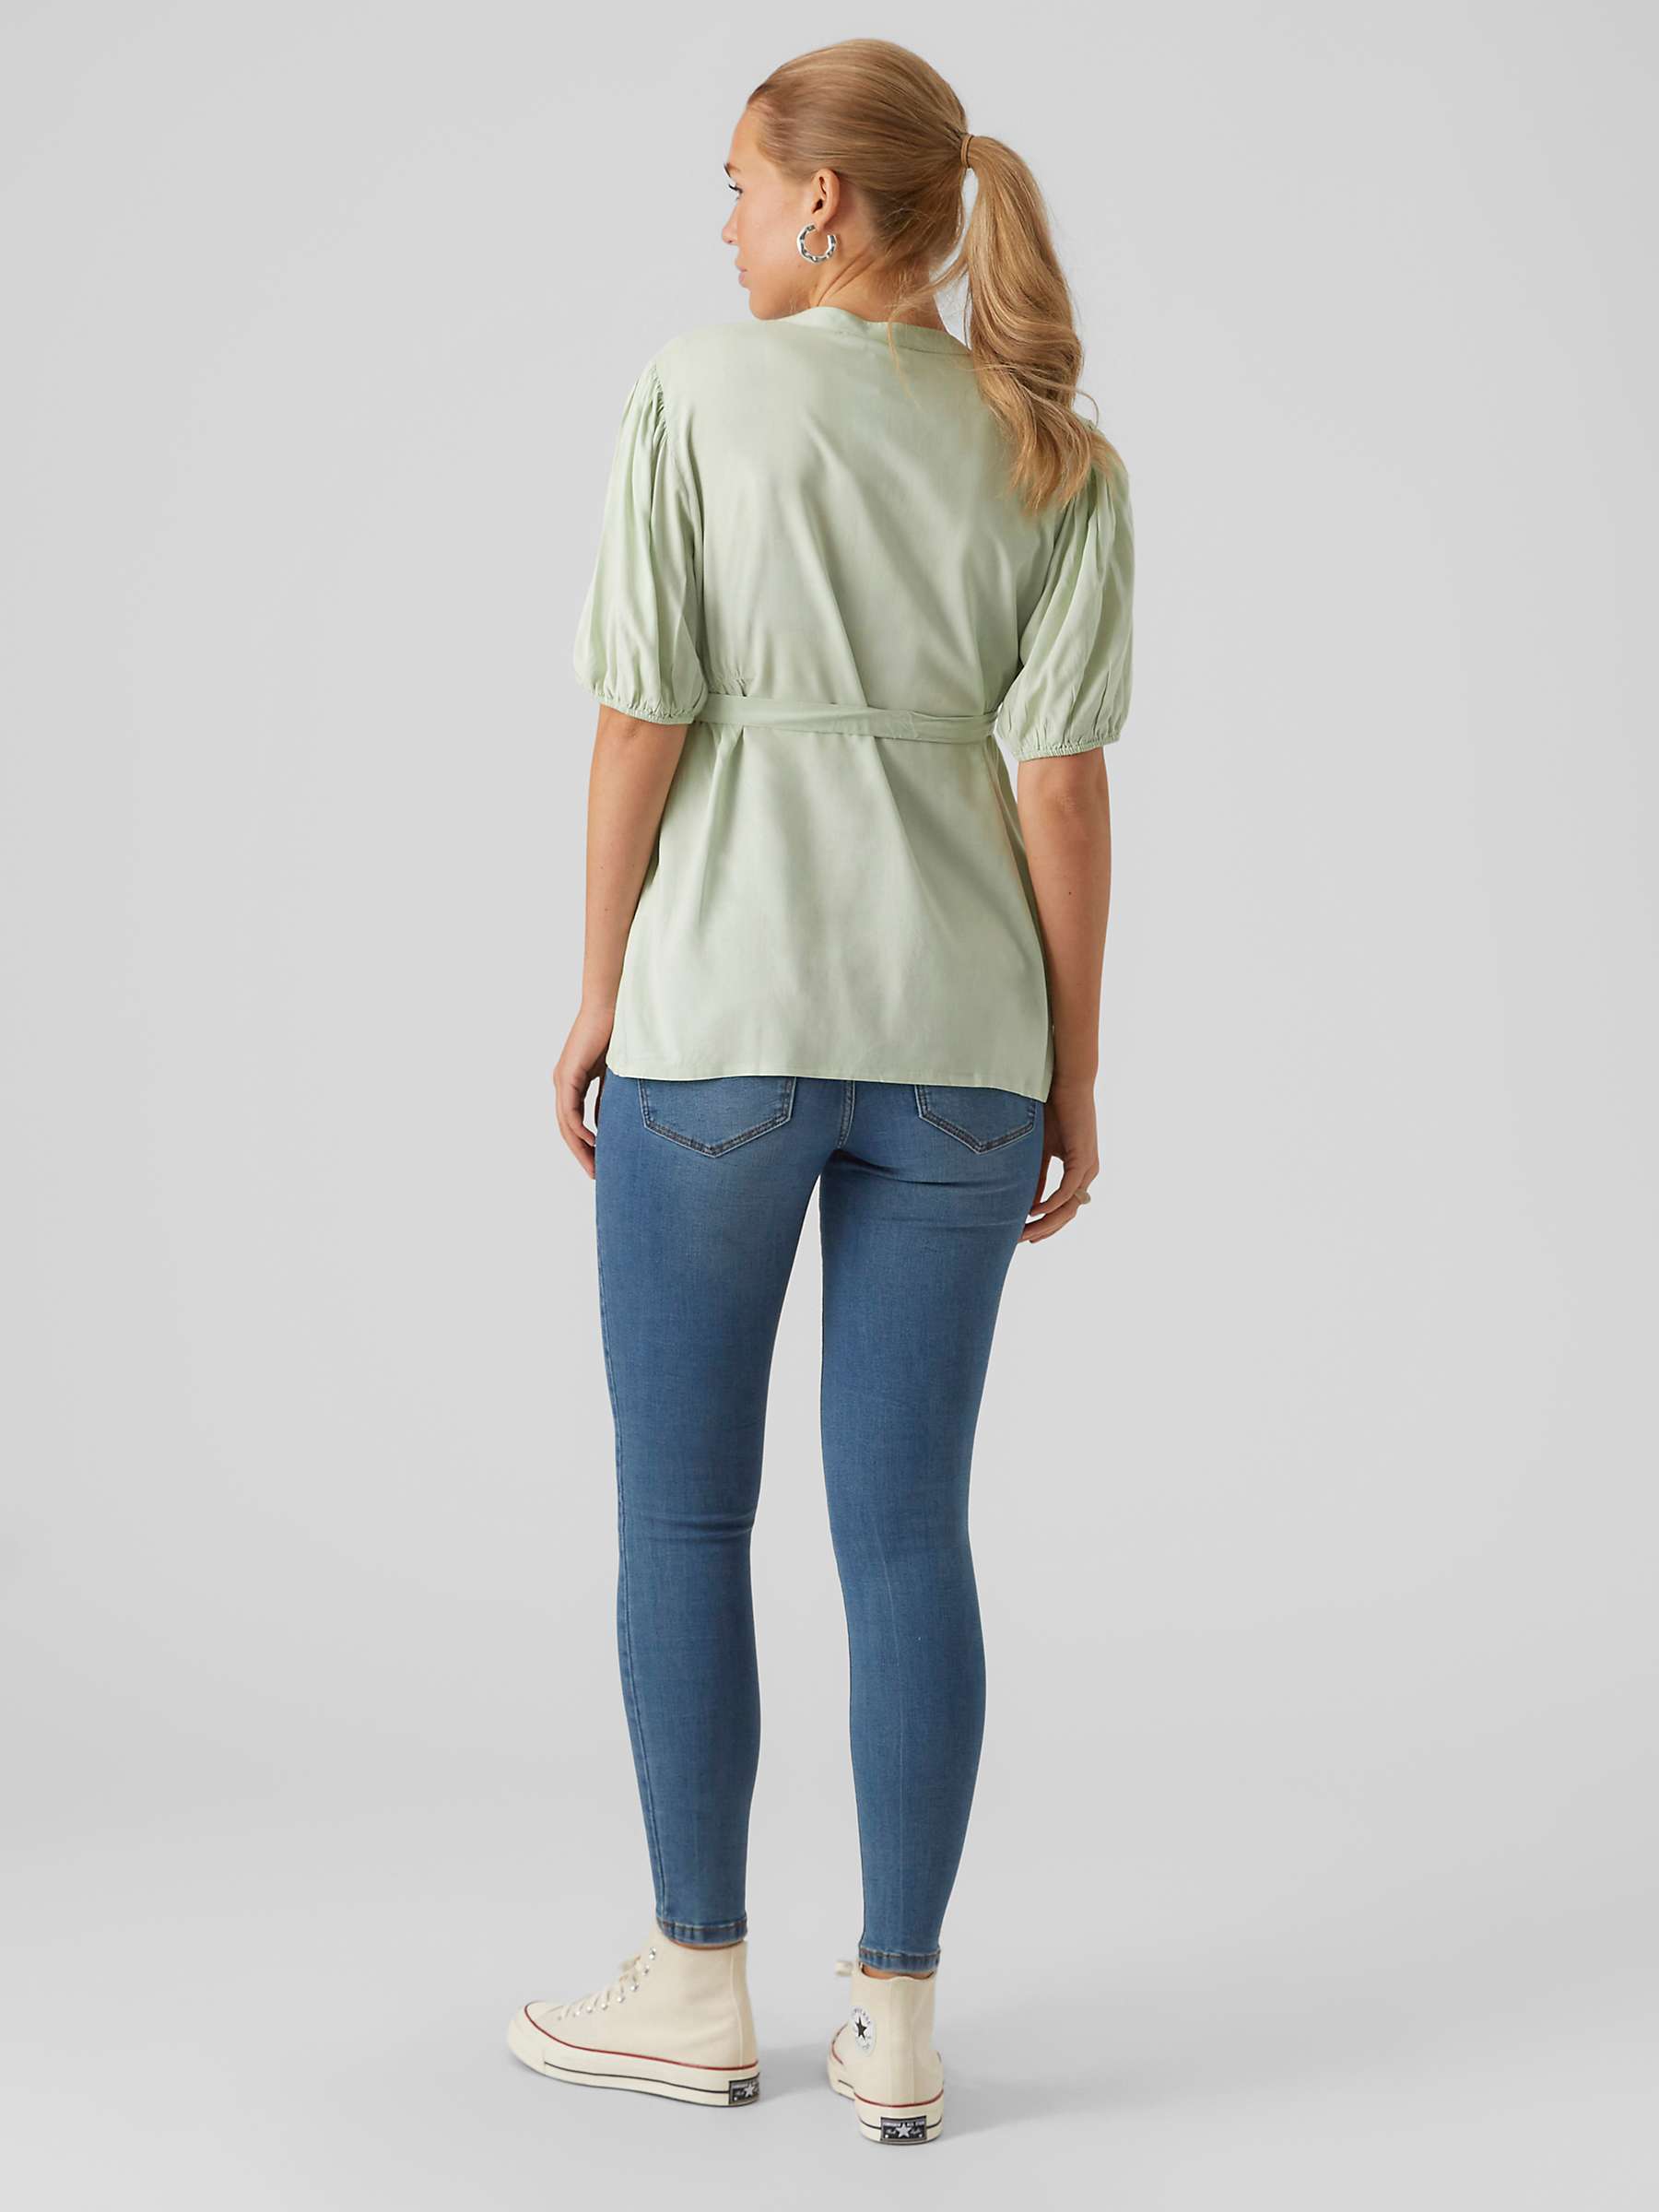 Buy Mamalicious Mercy Lia Maternity Top, Smoke Green Online at johnlewis.com